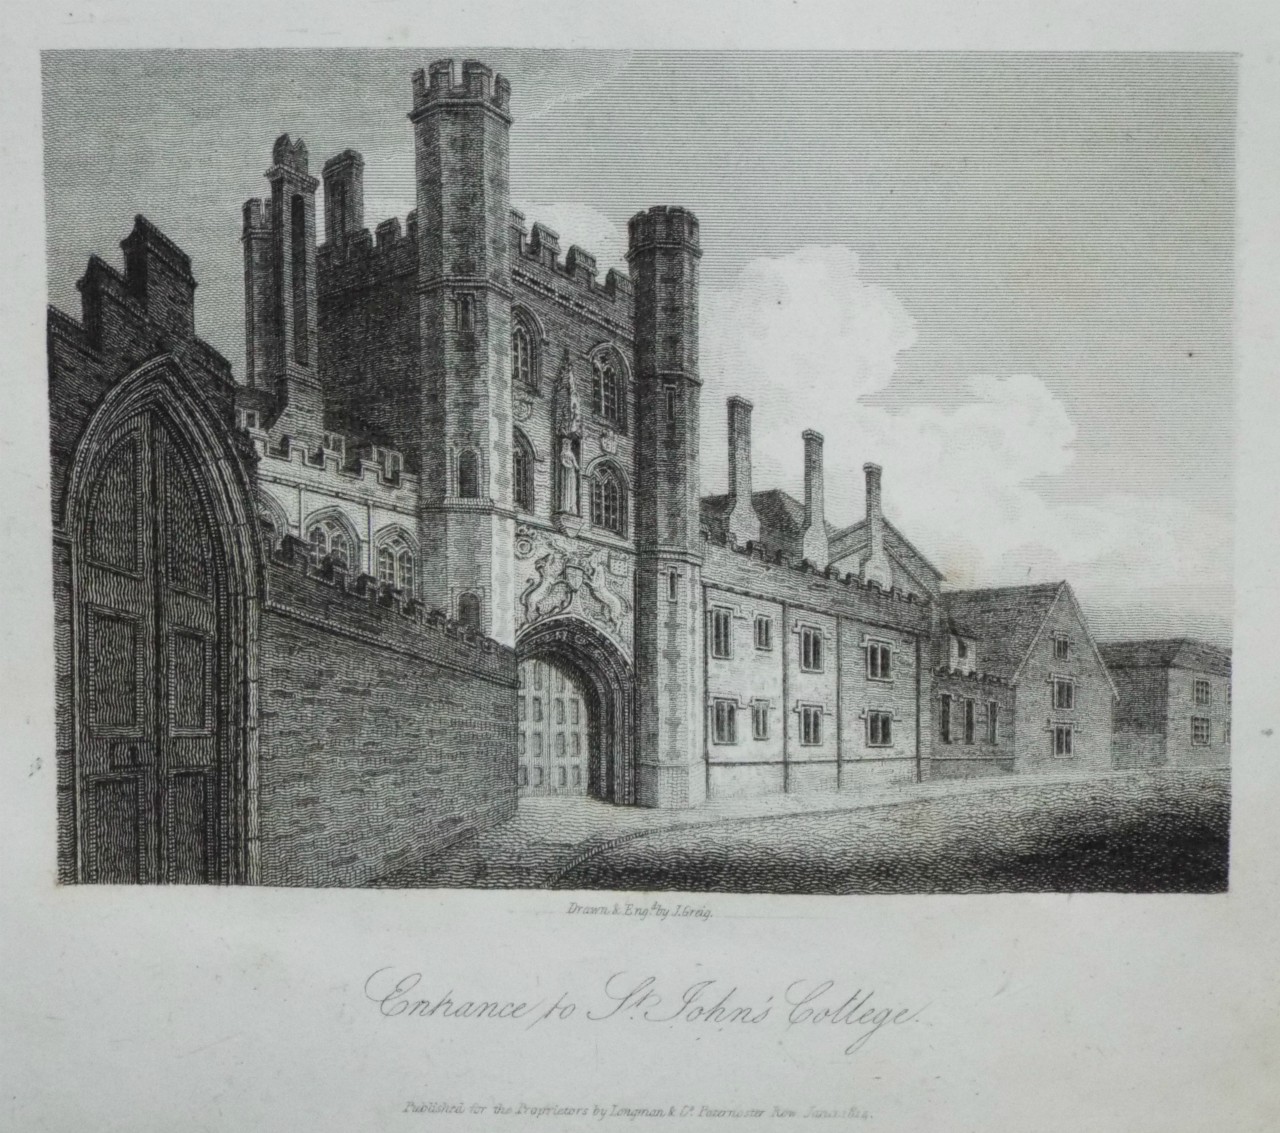 Print - Entrance to St. John's College. - Greig